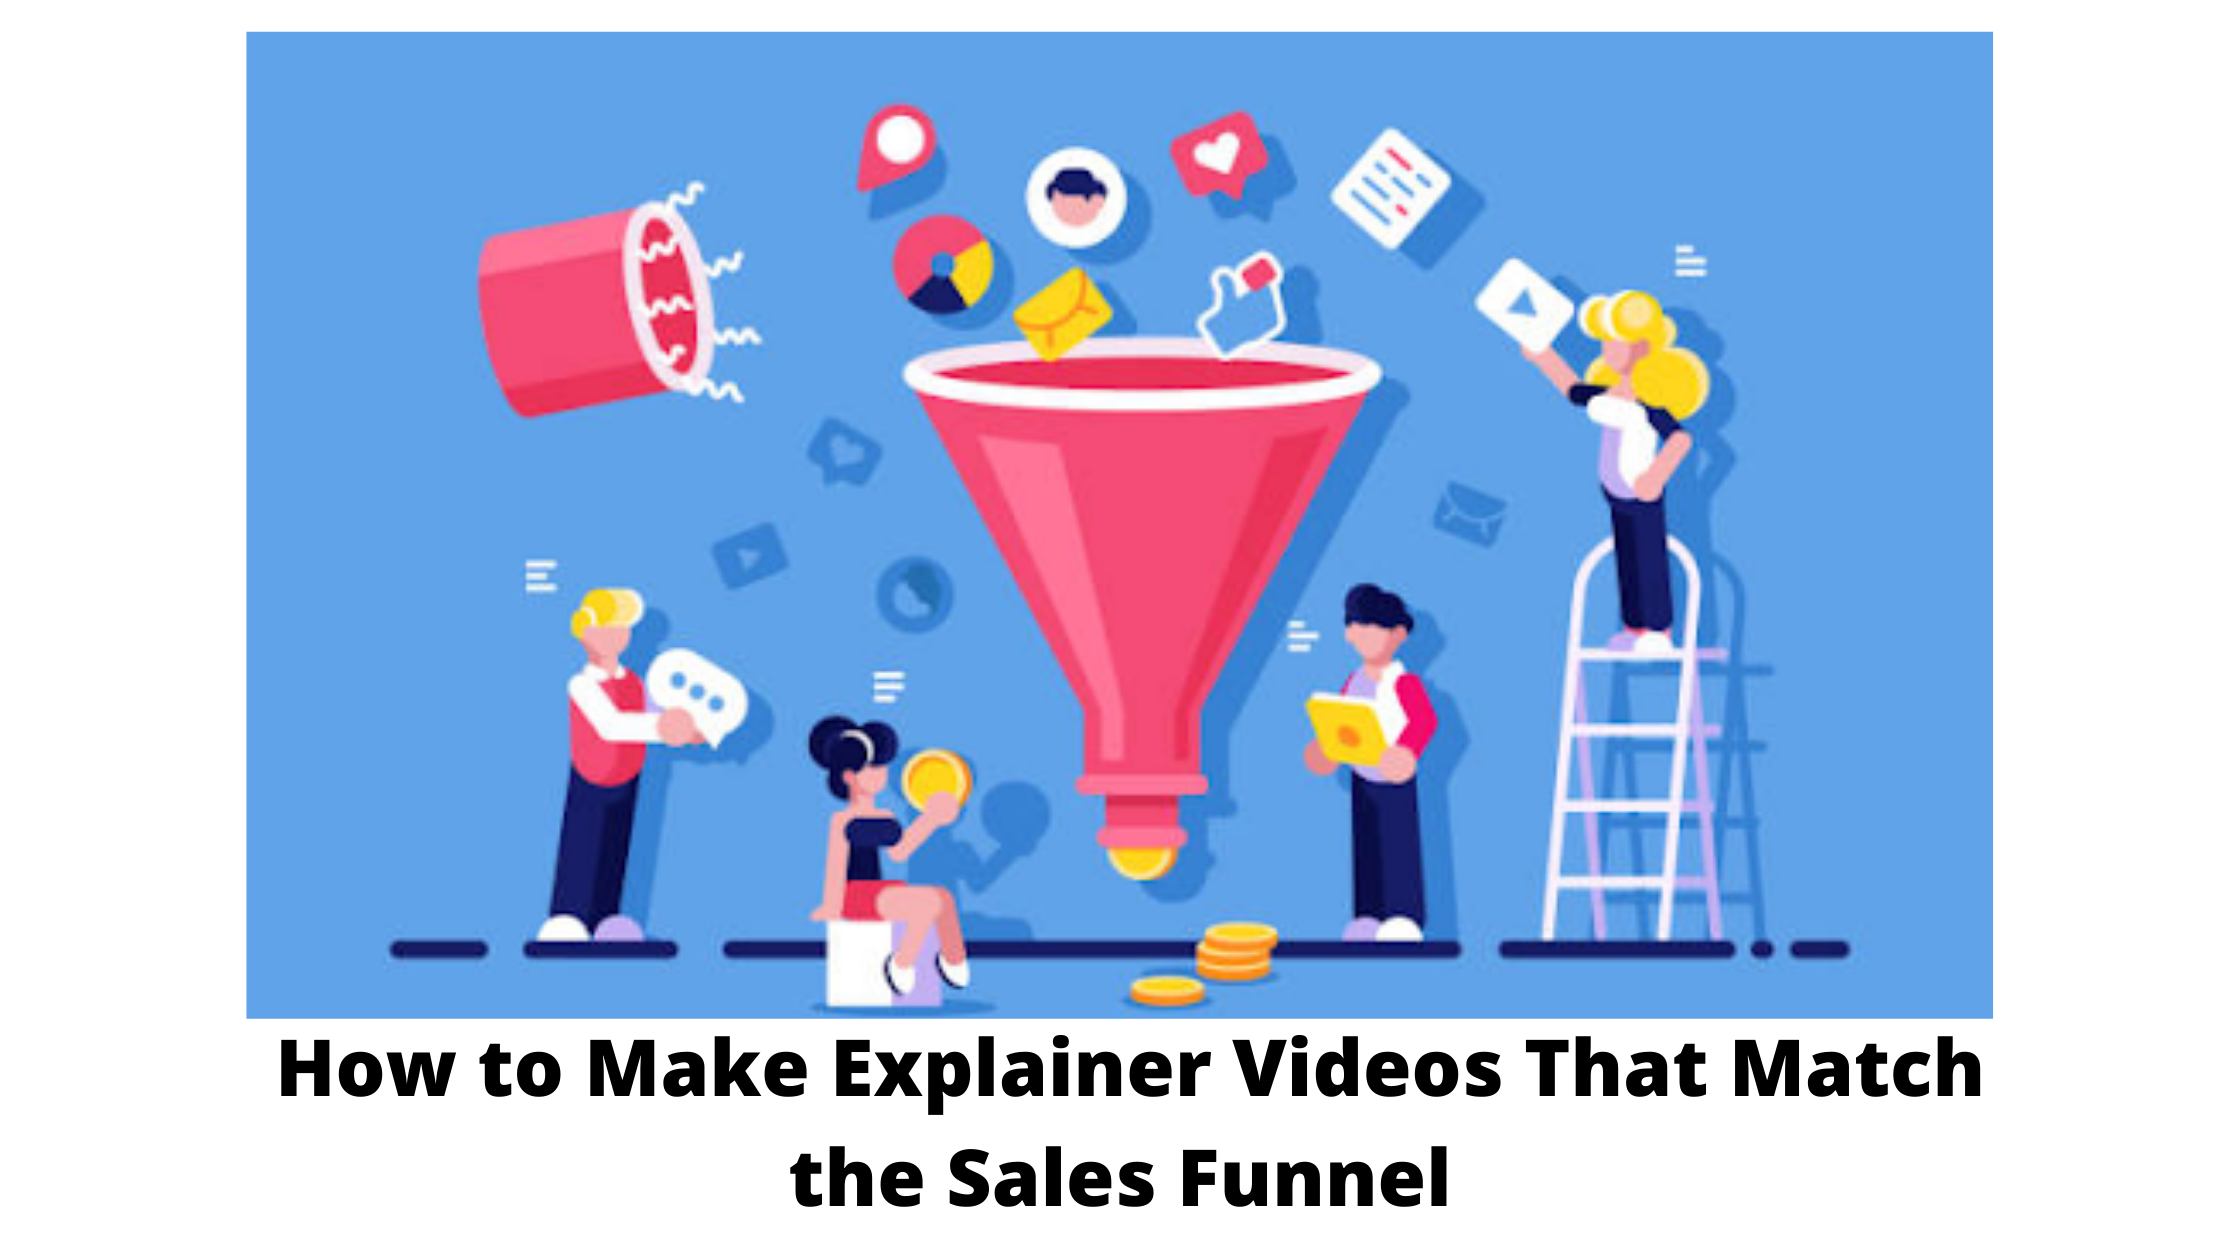  How to Make Explainer Videos That Match the Sales Funnel